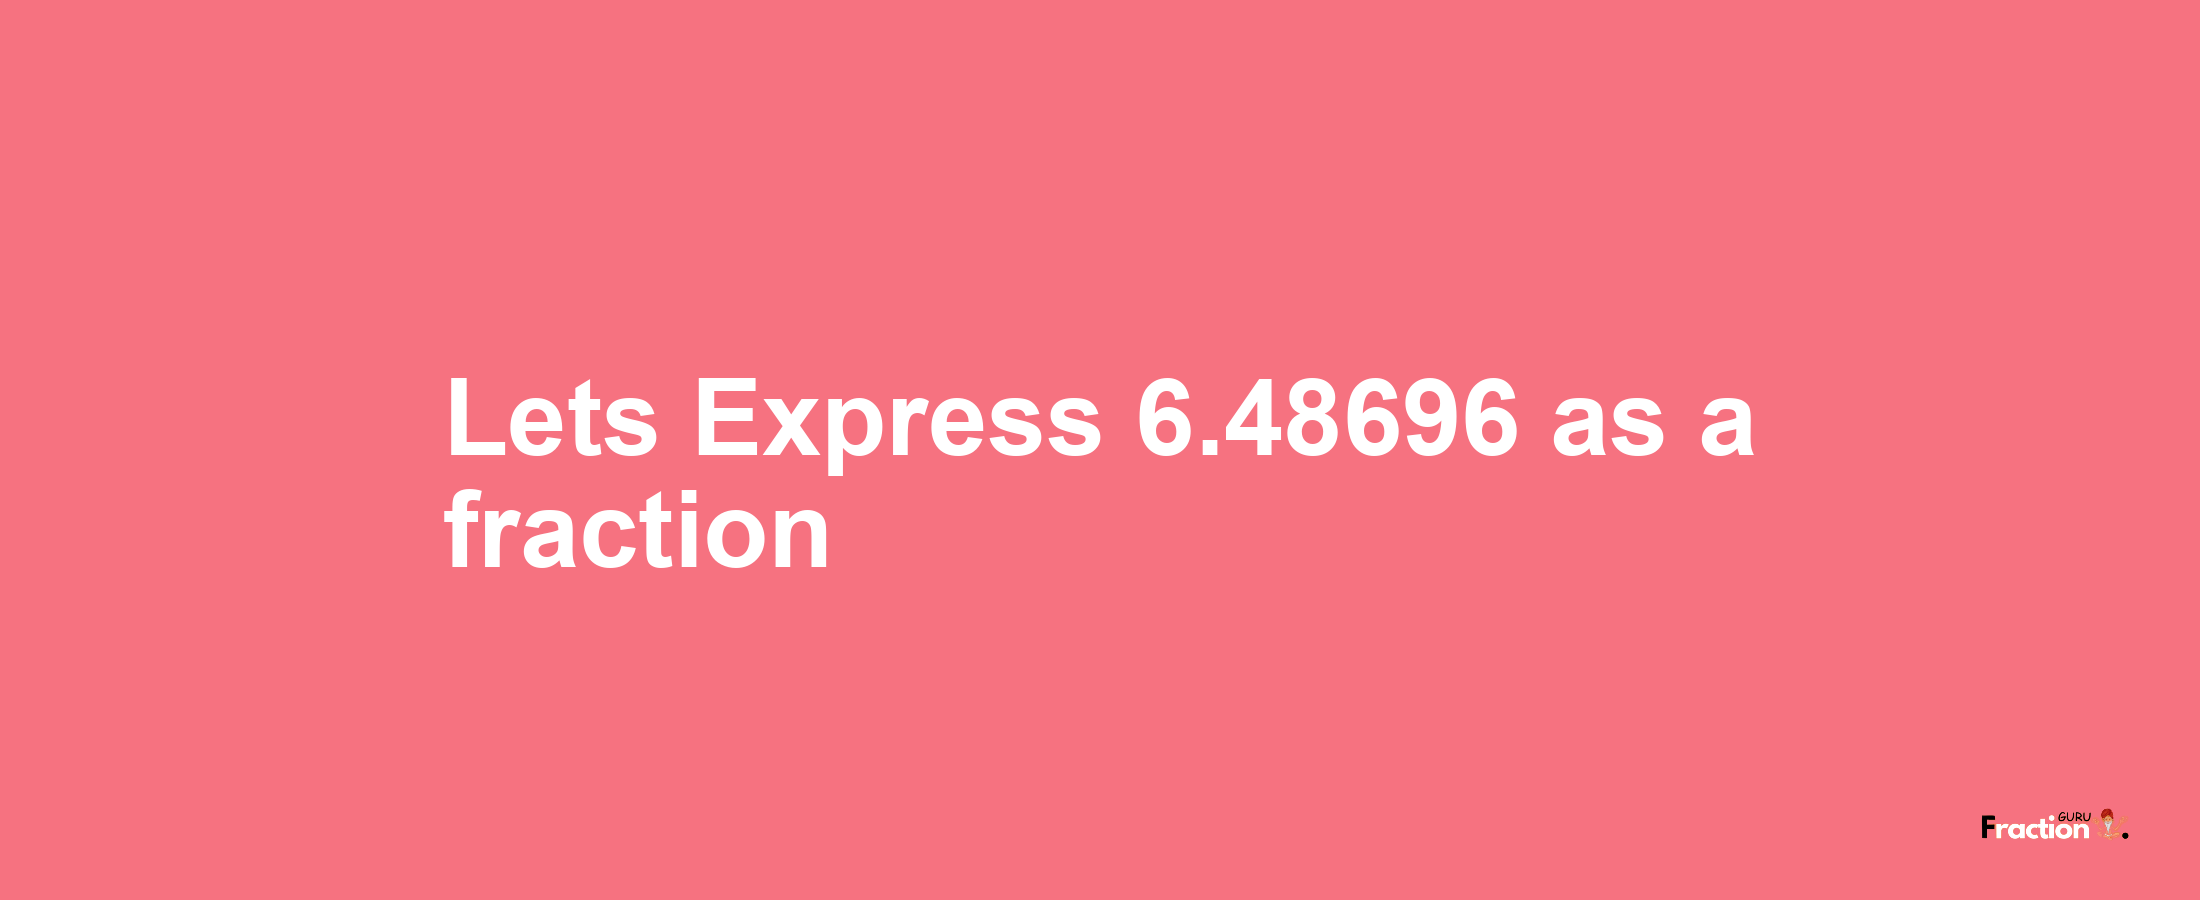 Lets Express 6.48696 as afraction